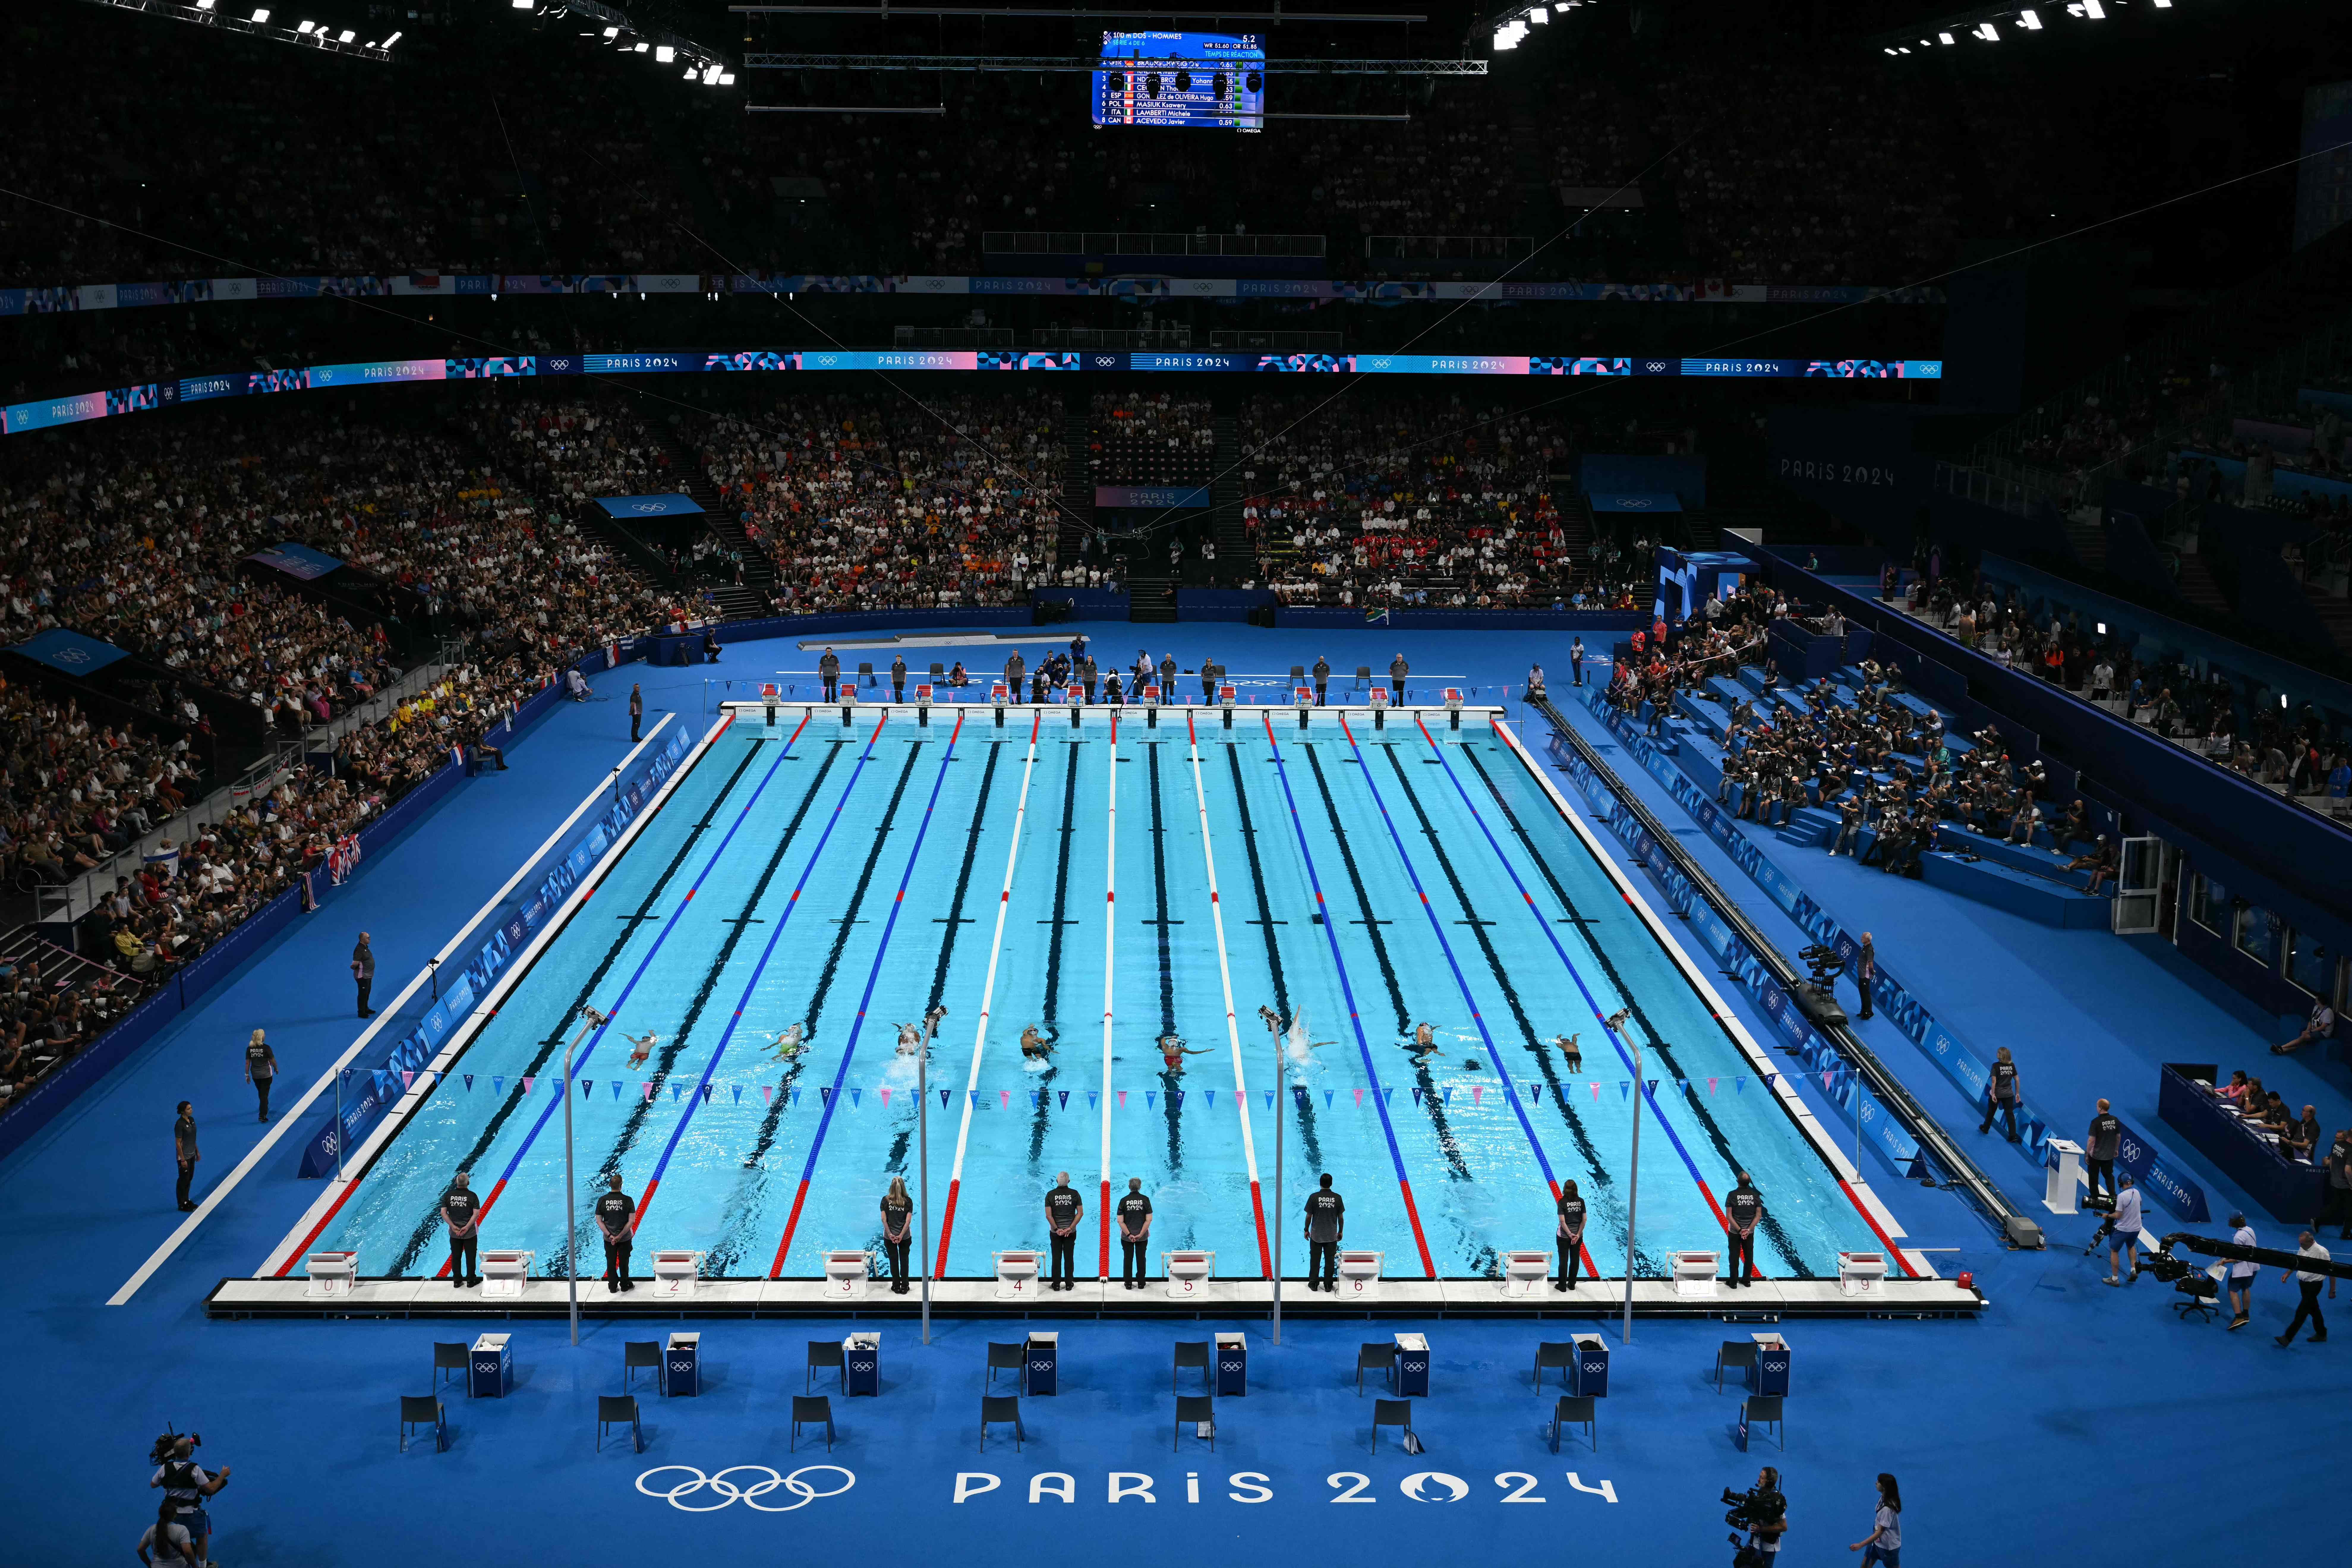 Swimmers compete in a heat of the men's 100m backstroke swimming event during the Paris 2024 Olympic Games at the Paris La Defense Arena in Nanterre, west of Paris, on July 28, 2024. (Photo by Jonathan NACKSTRAND / AFP)